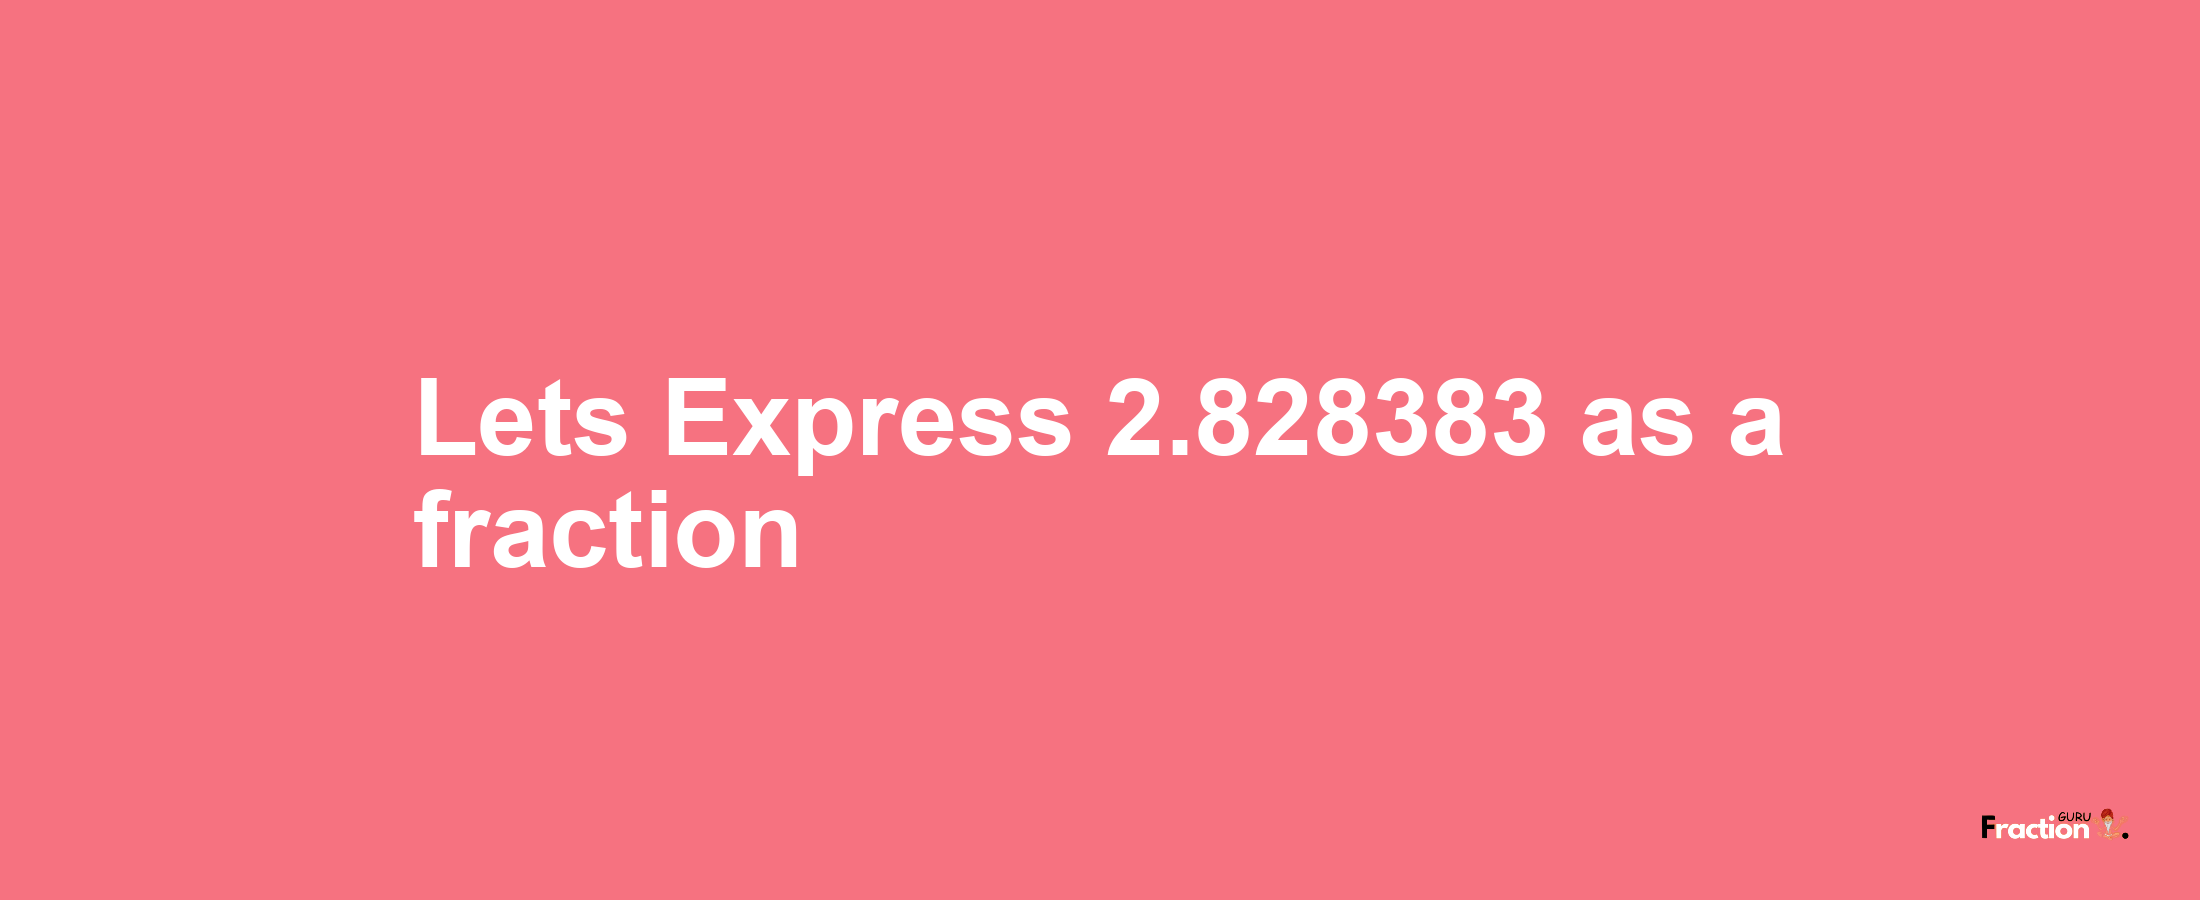 Lets Express 2.828383 as afraction